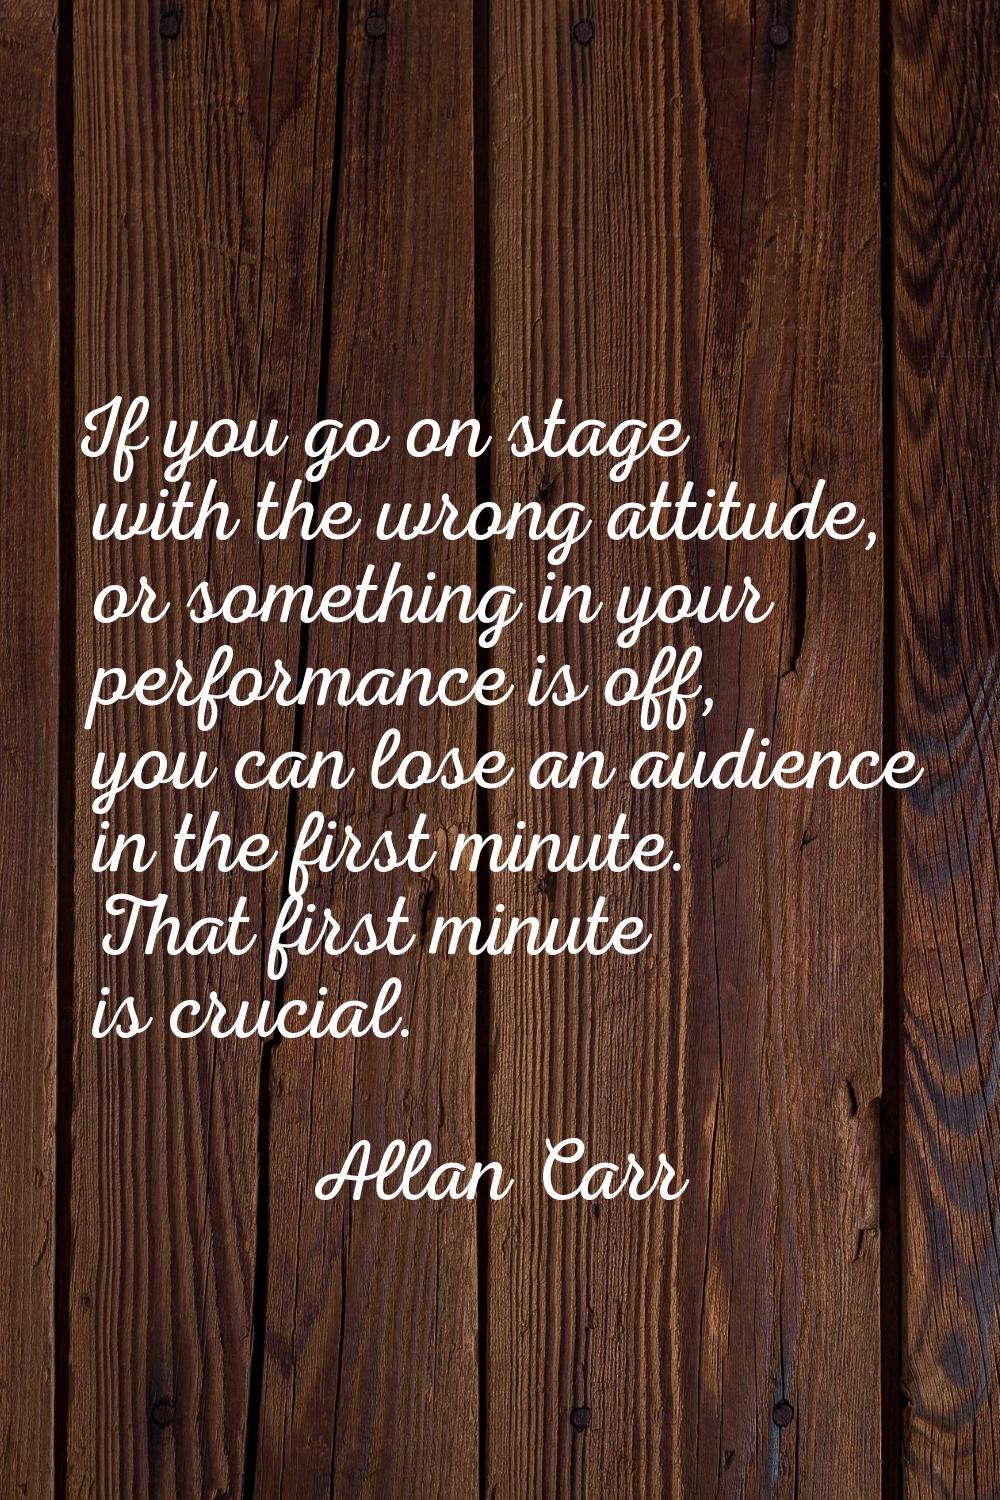 If you go on stage with the wrong attitude, or something in your performance is off, you can lose a